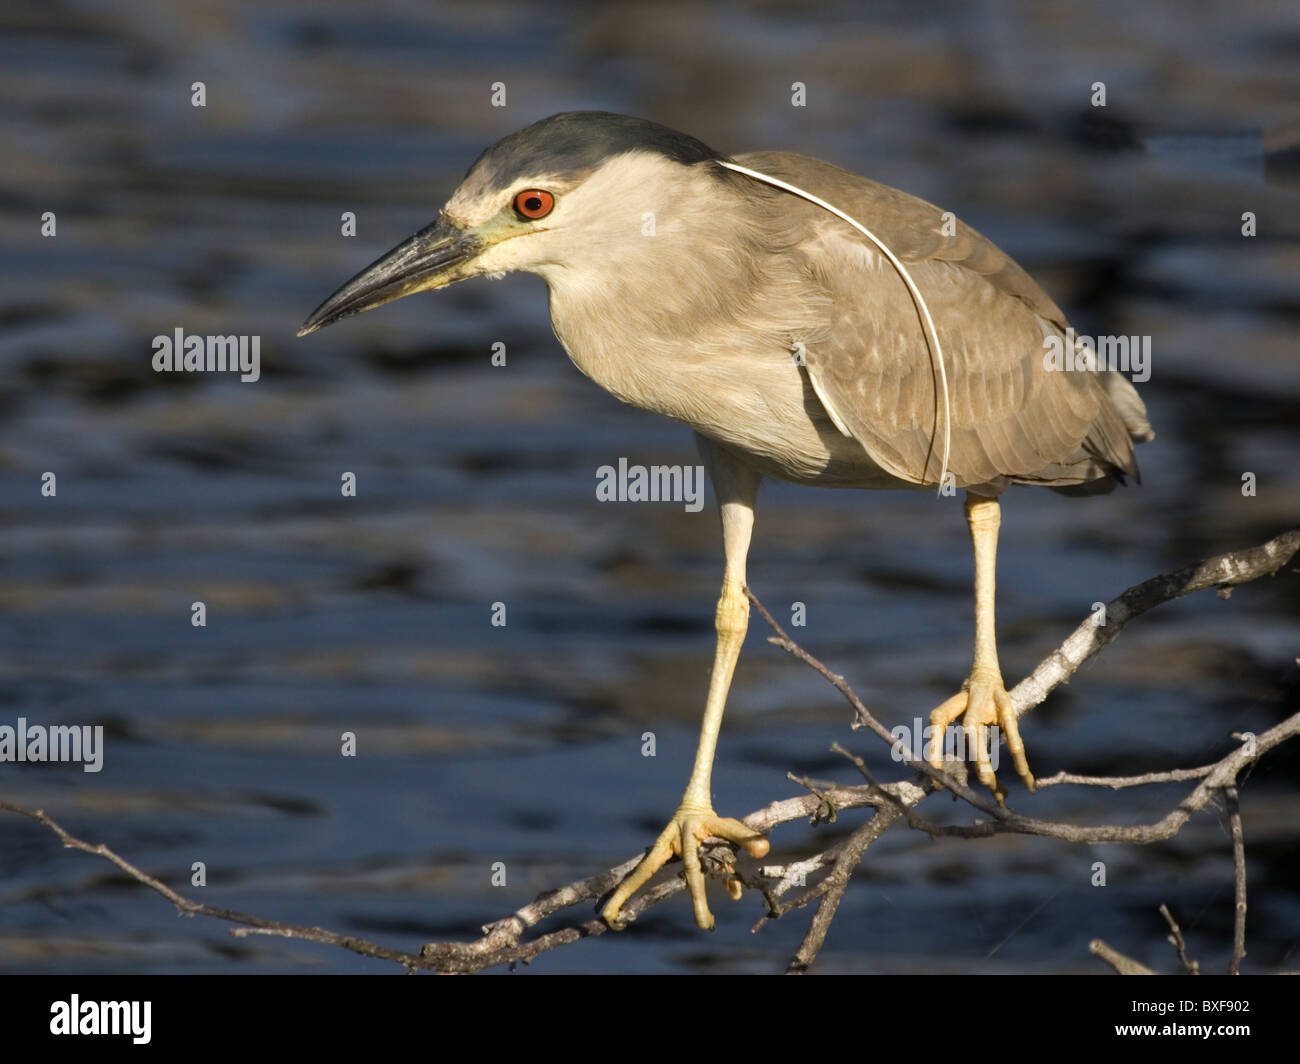 Black-crowned night heron perched above water Stock Photo